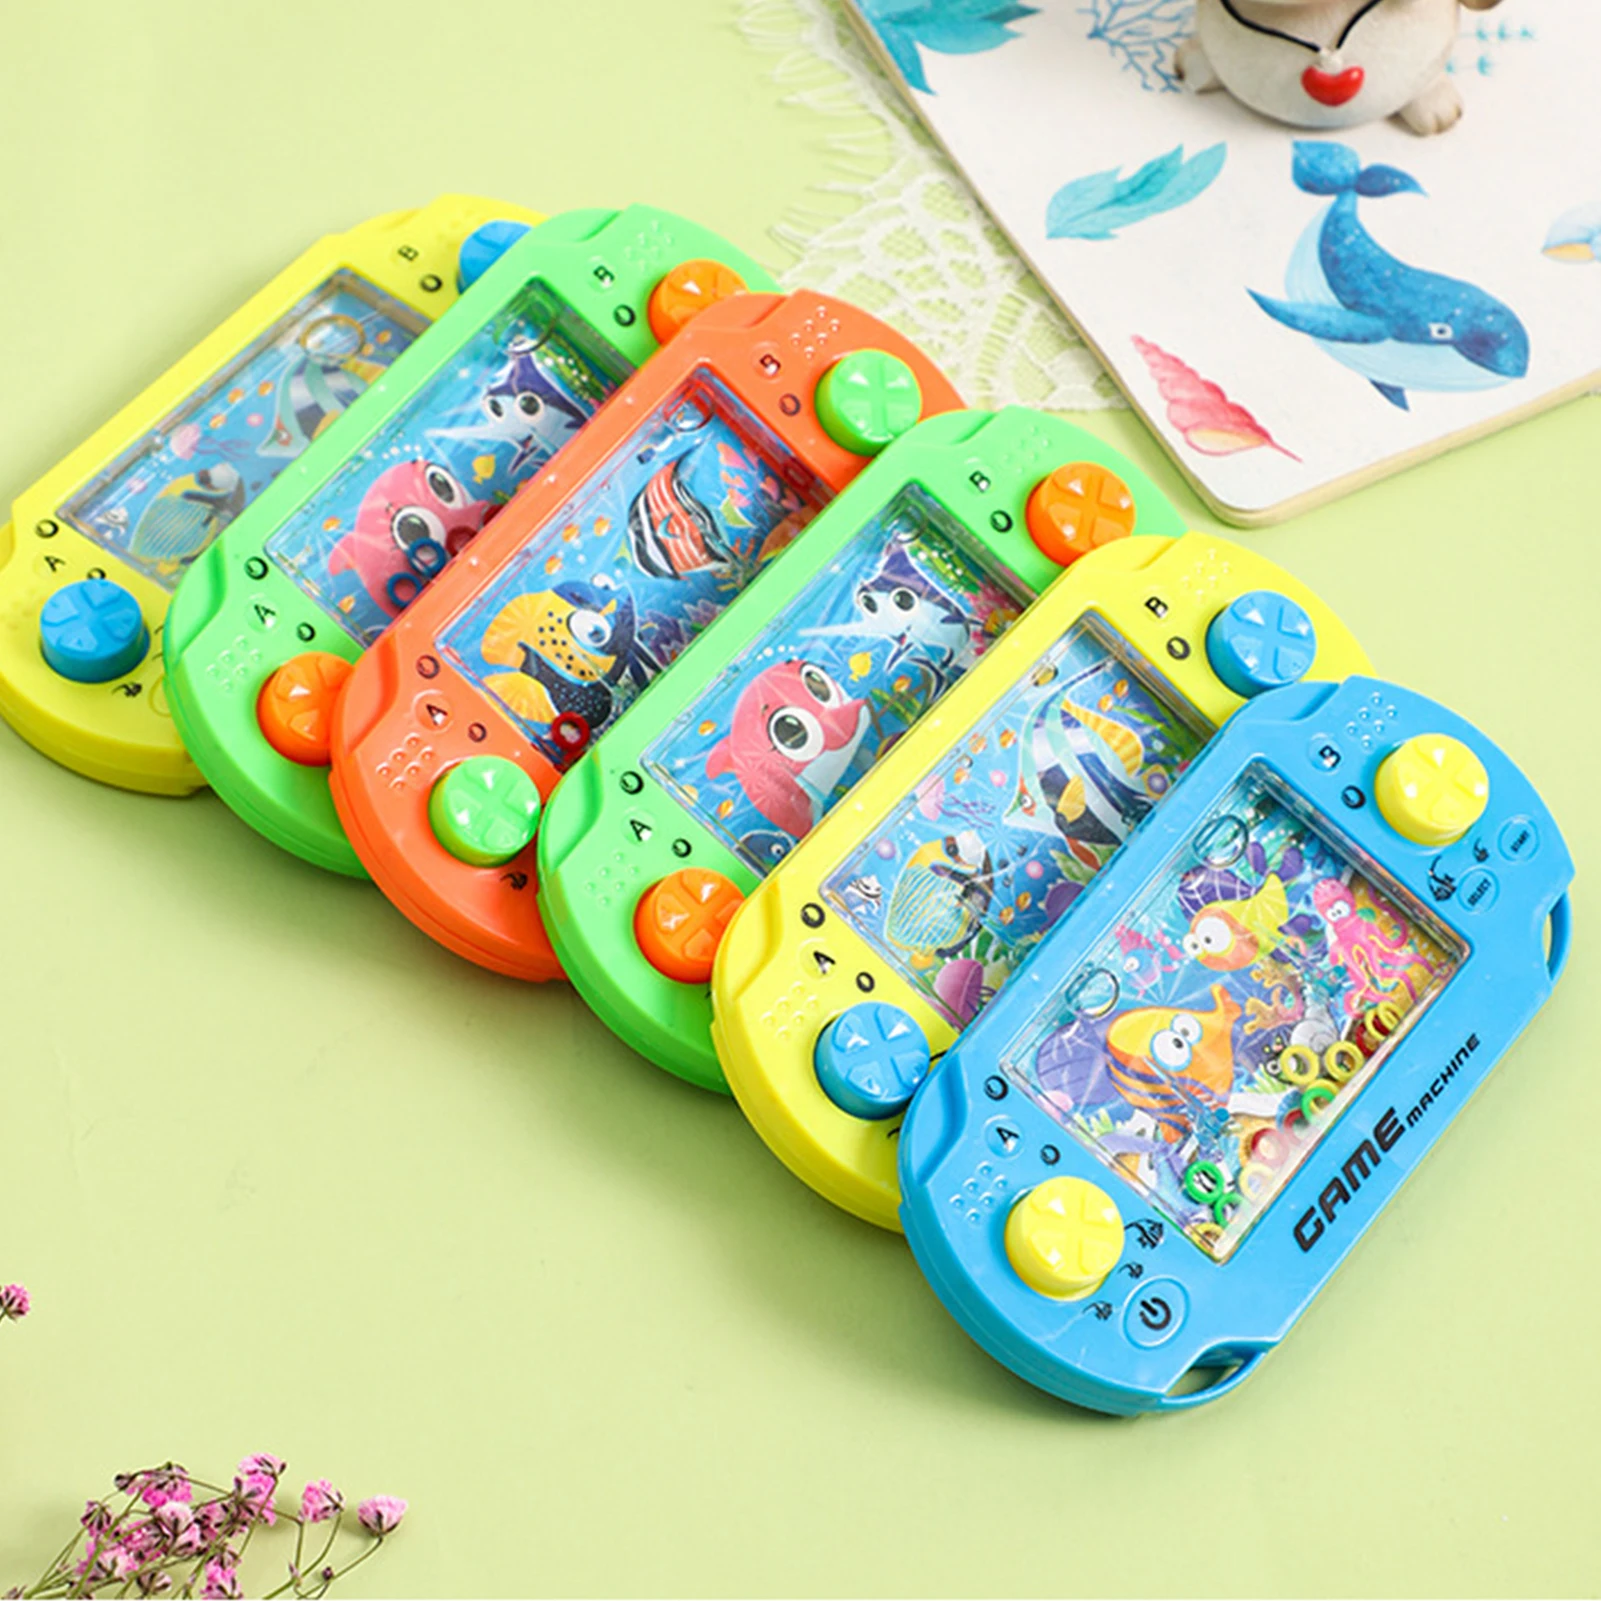 Buy MAJIK Handheld Mobile Phone Water Ring Game for Kids Boys and Girls and  Best Gift Item (Combo of 2, Multicolour) Online at Low Prices in India -  Amazon.in